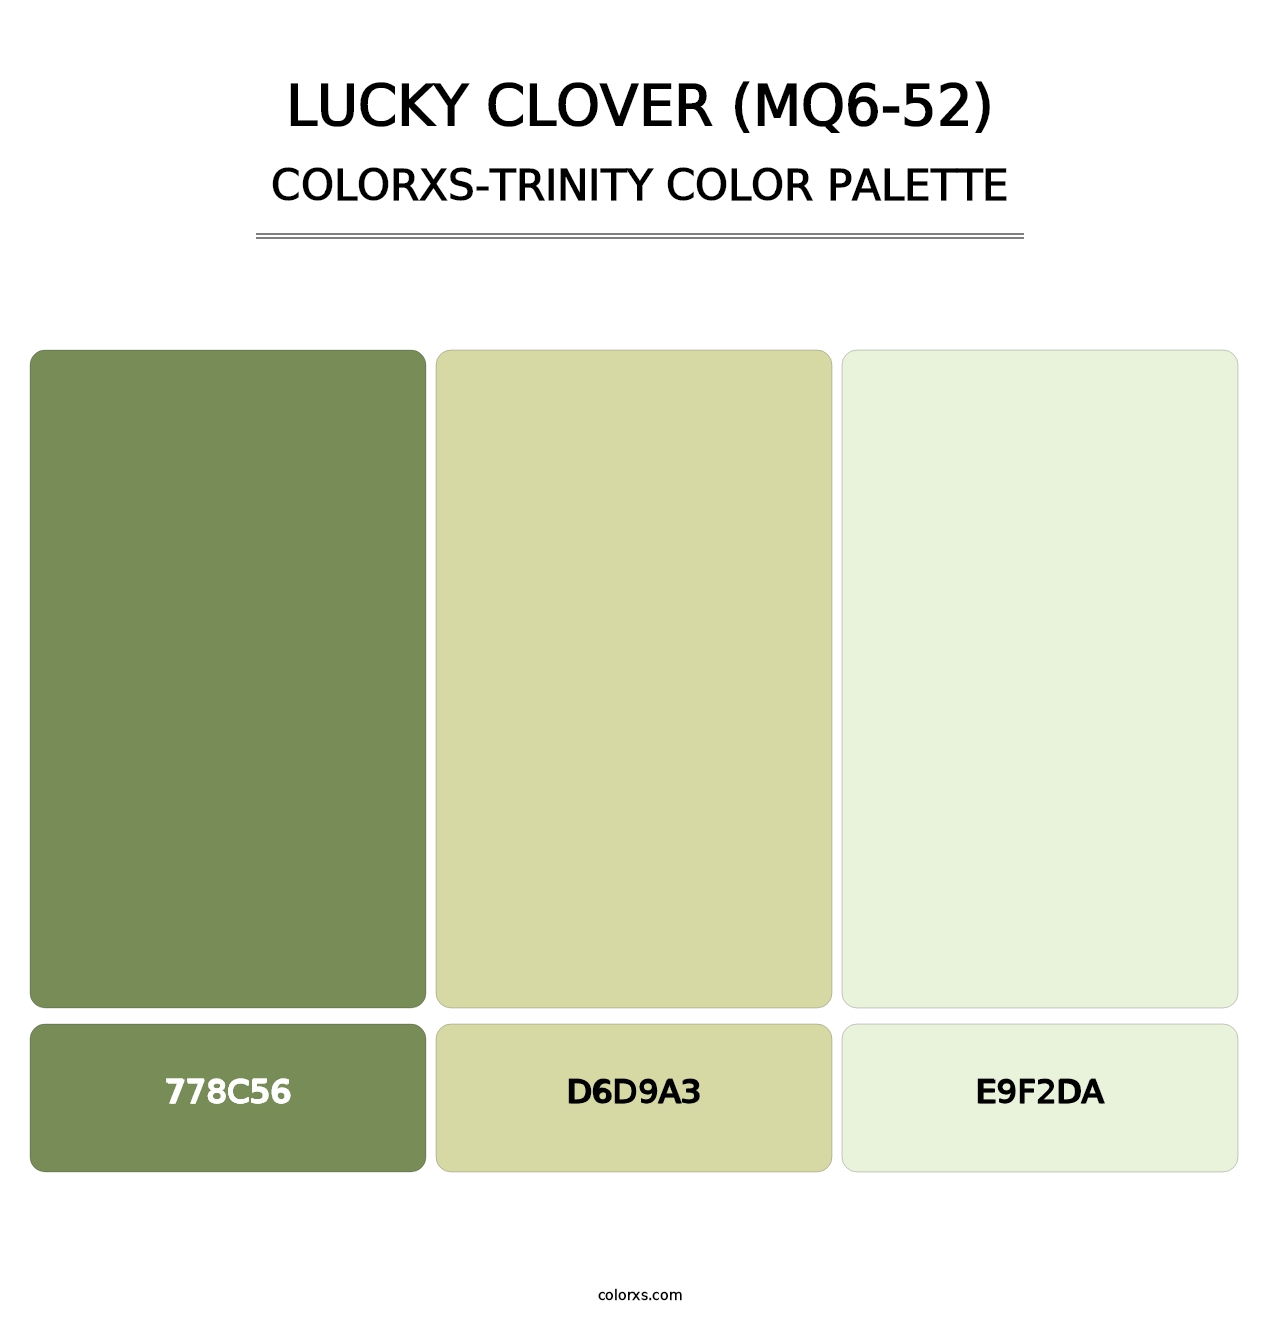 Lucky Clover (MQ6-52) - Colorxs Trinity Palette